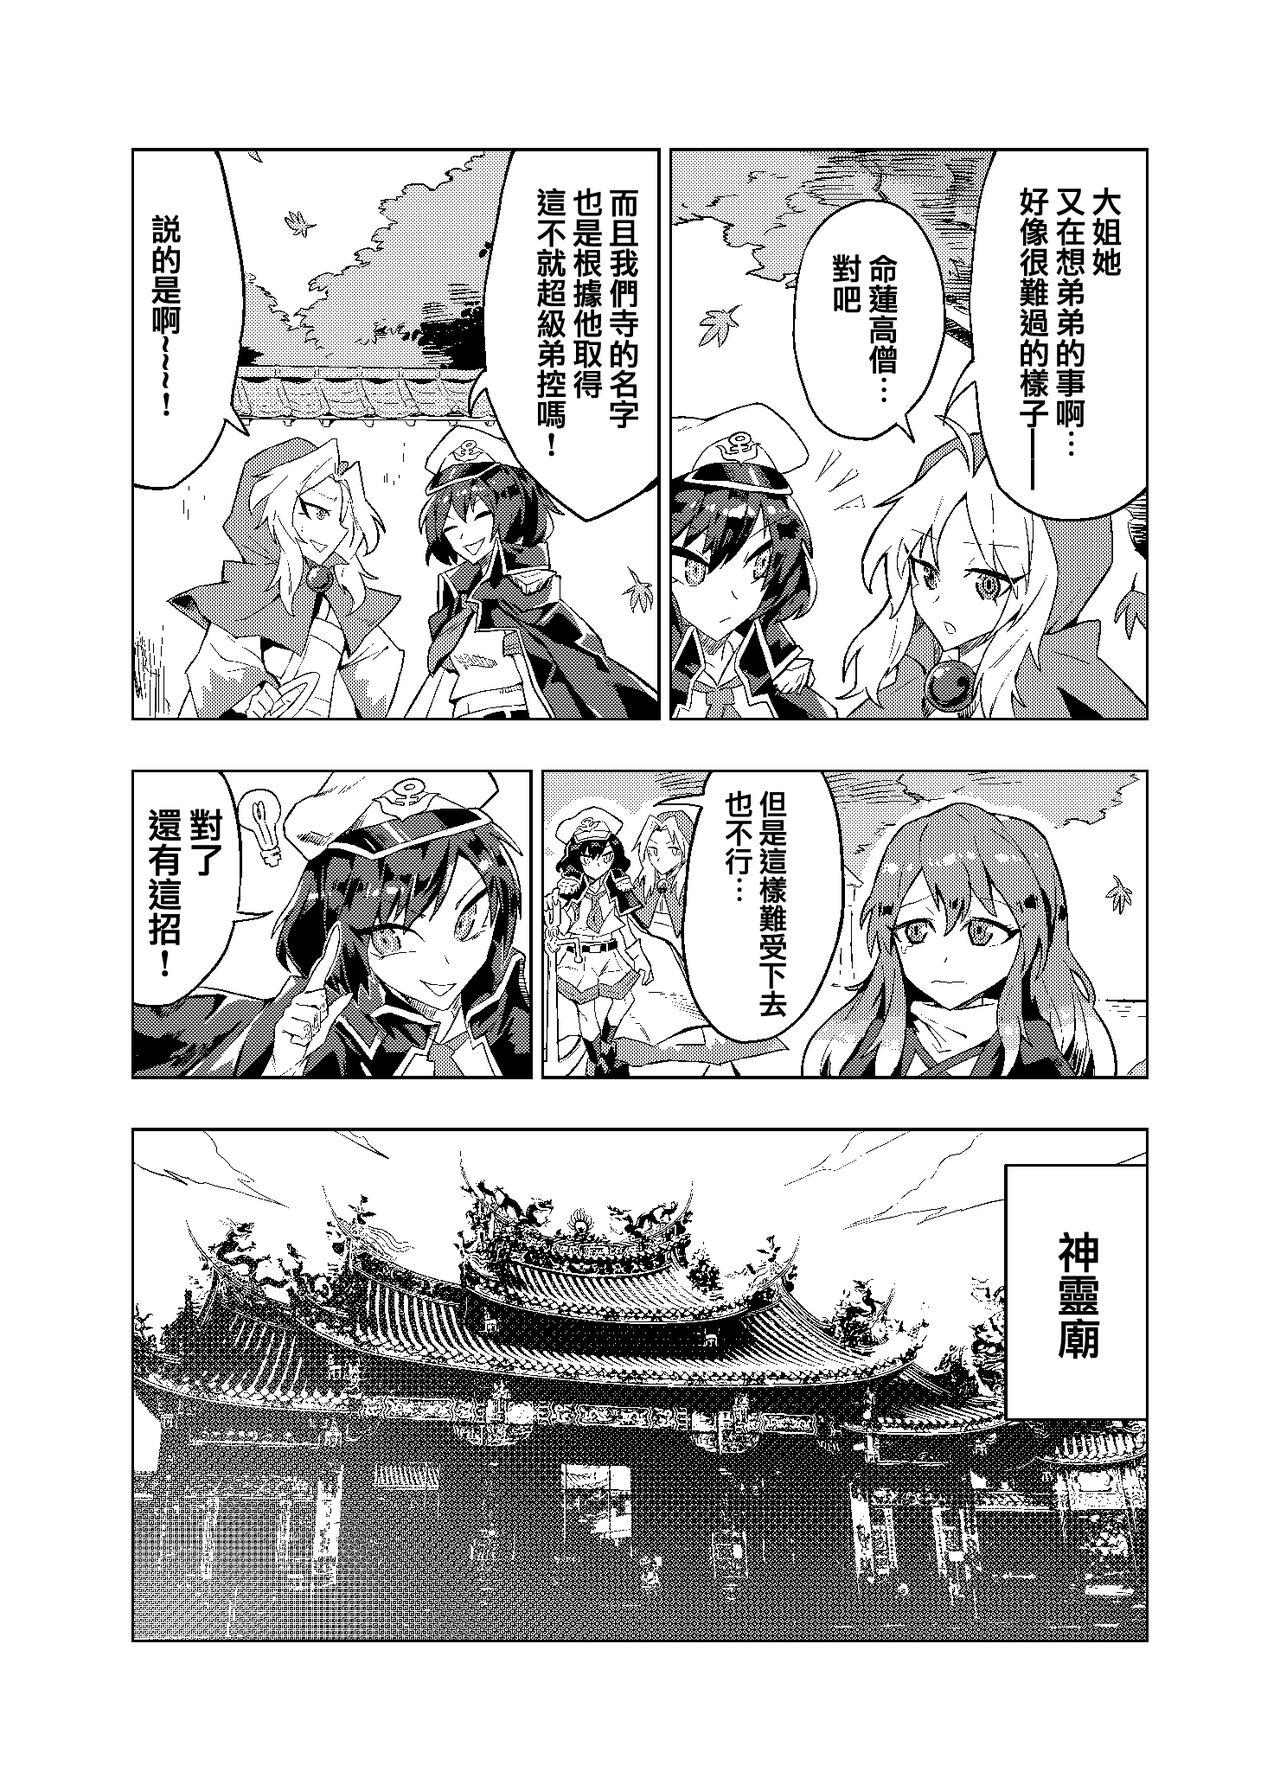 Realsex 弟控圣和换装太子（Touhou Project） - Touhou project Cum Eating - Page 4